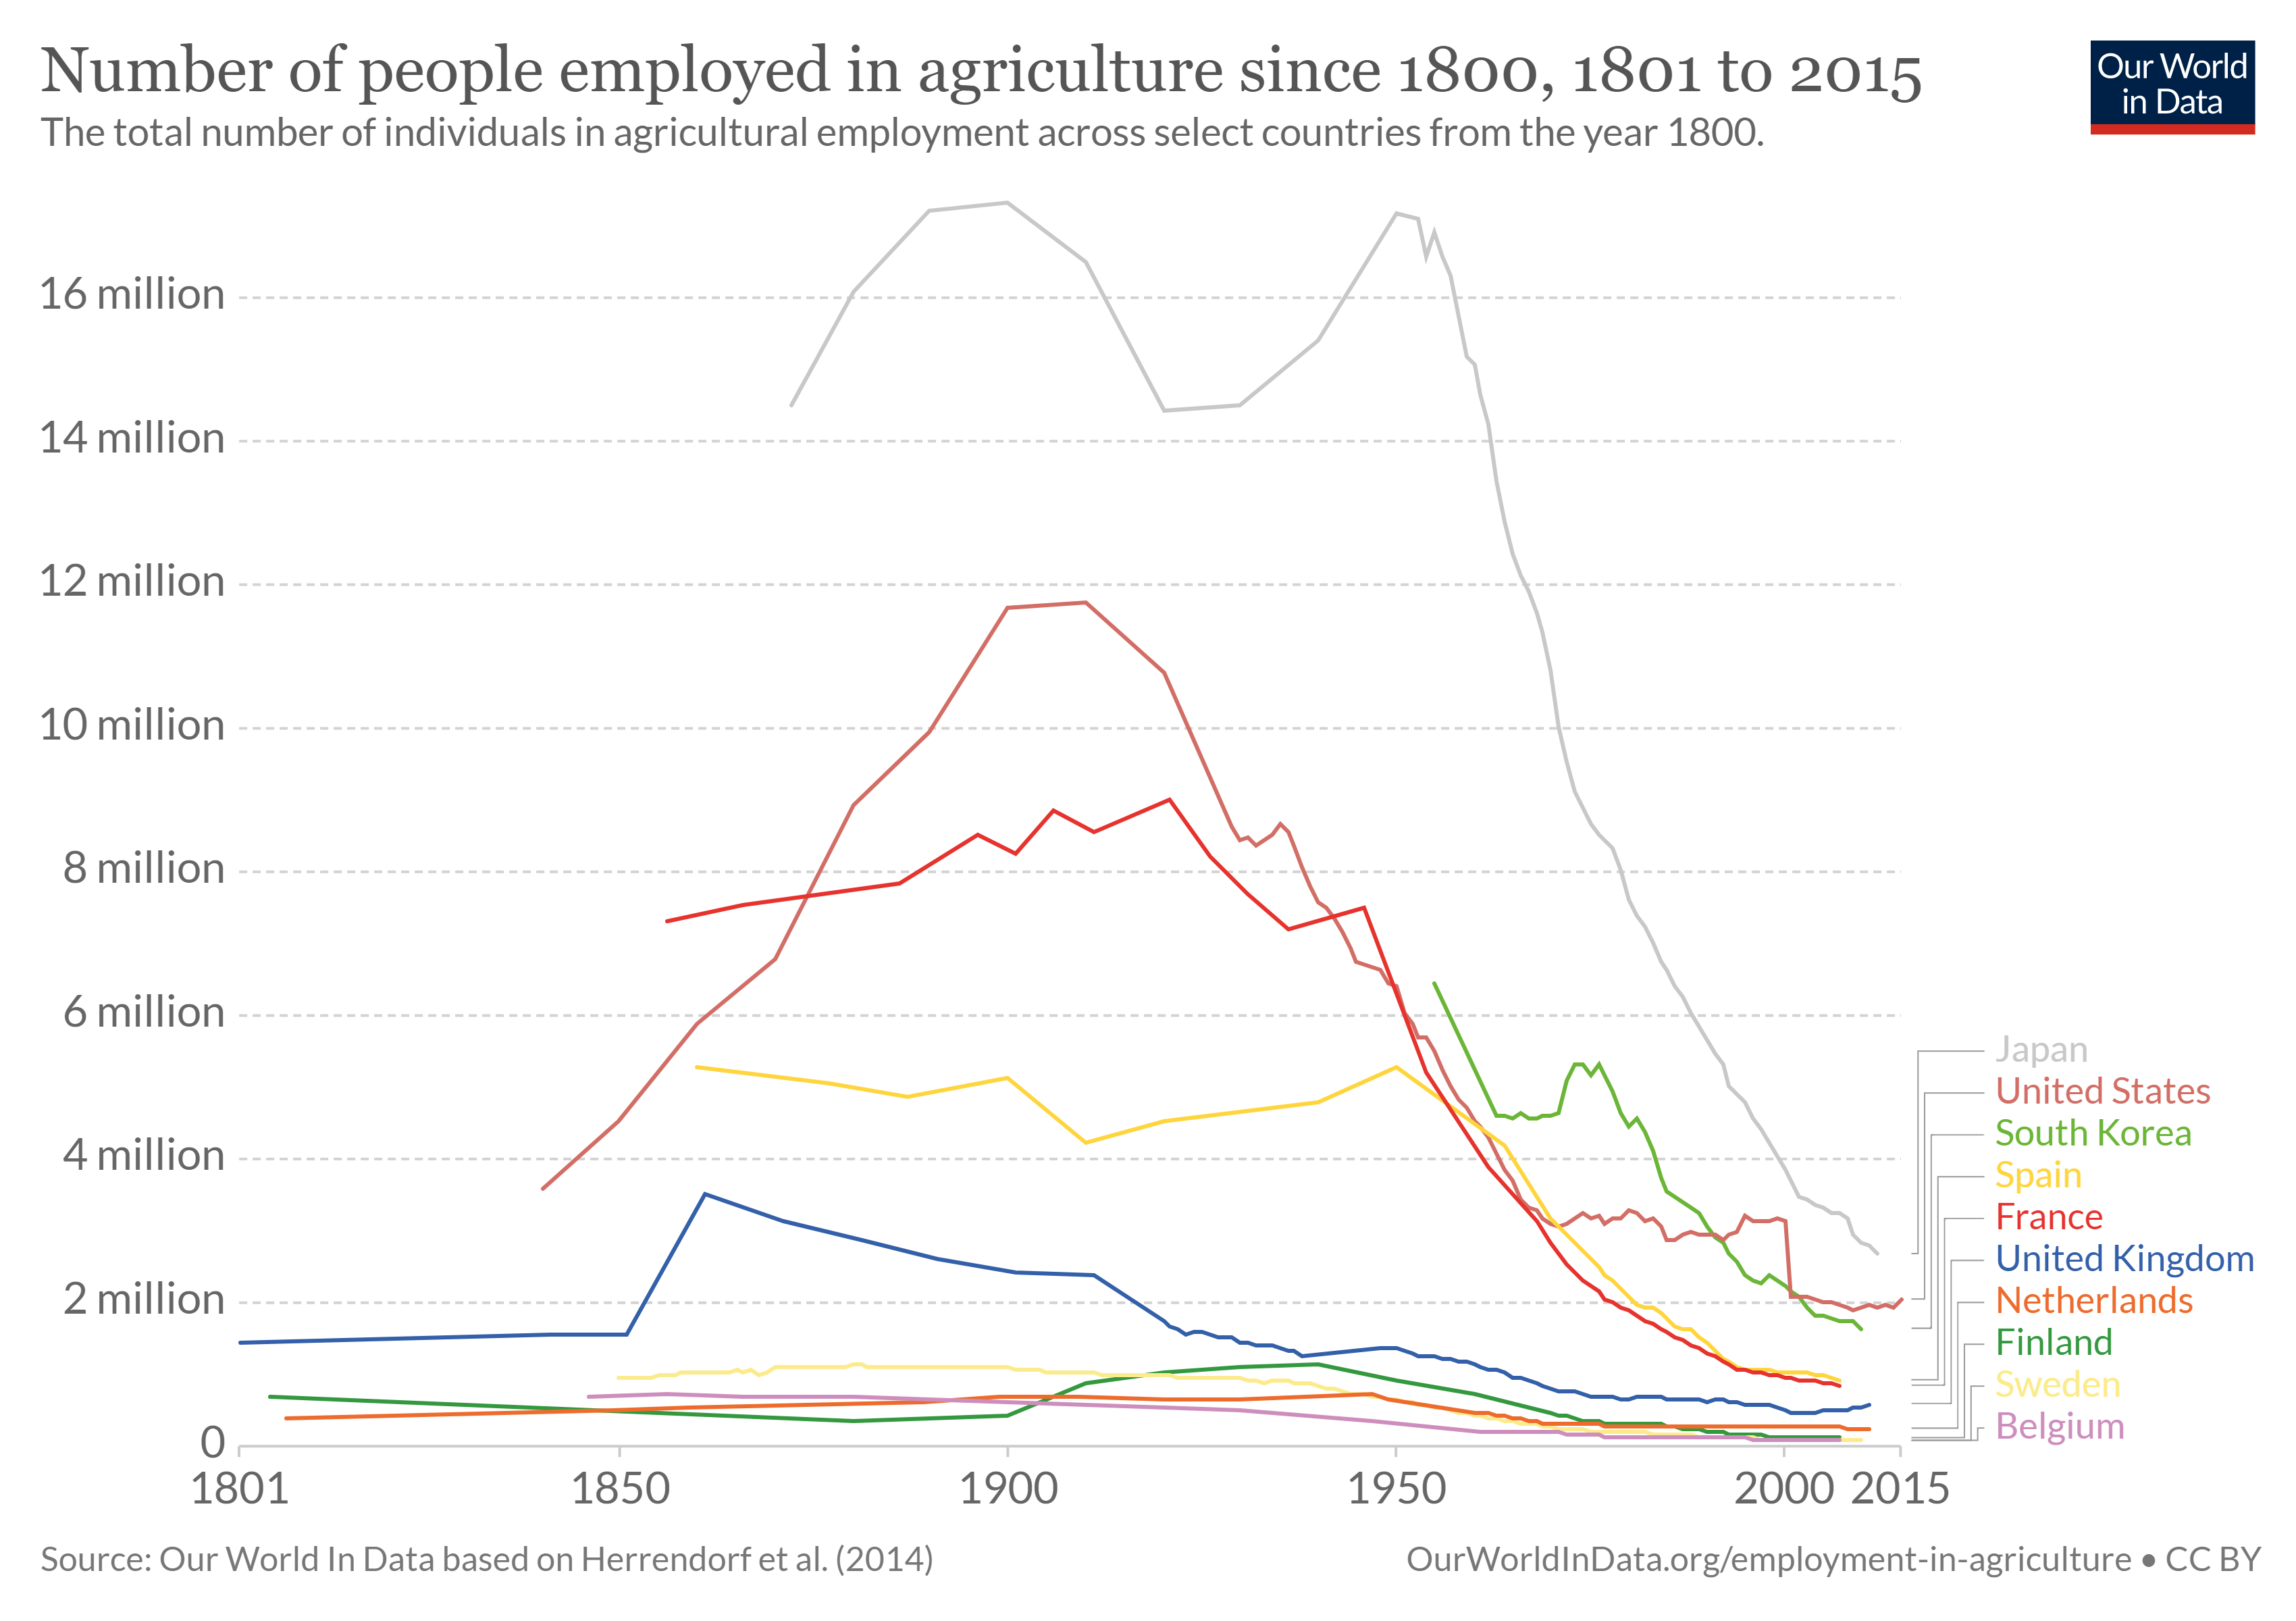 Line graph of the number of people employed in agriculture in selected countries, which has overall decreased since the early 1900s.